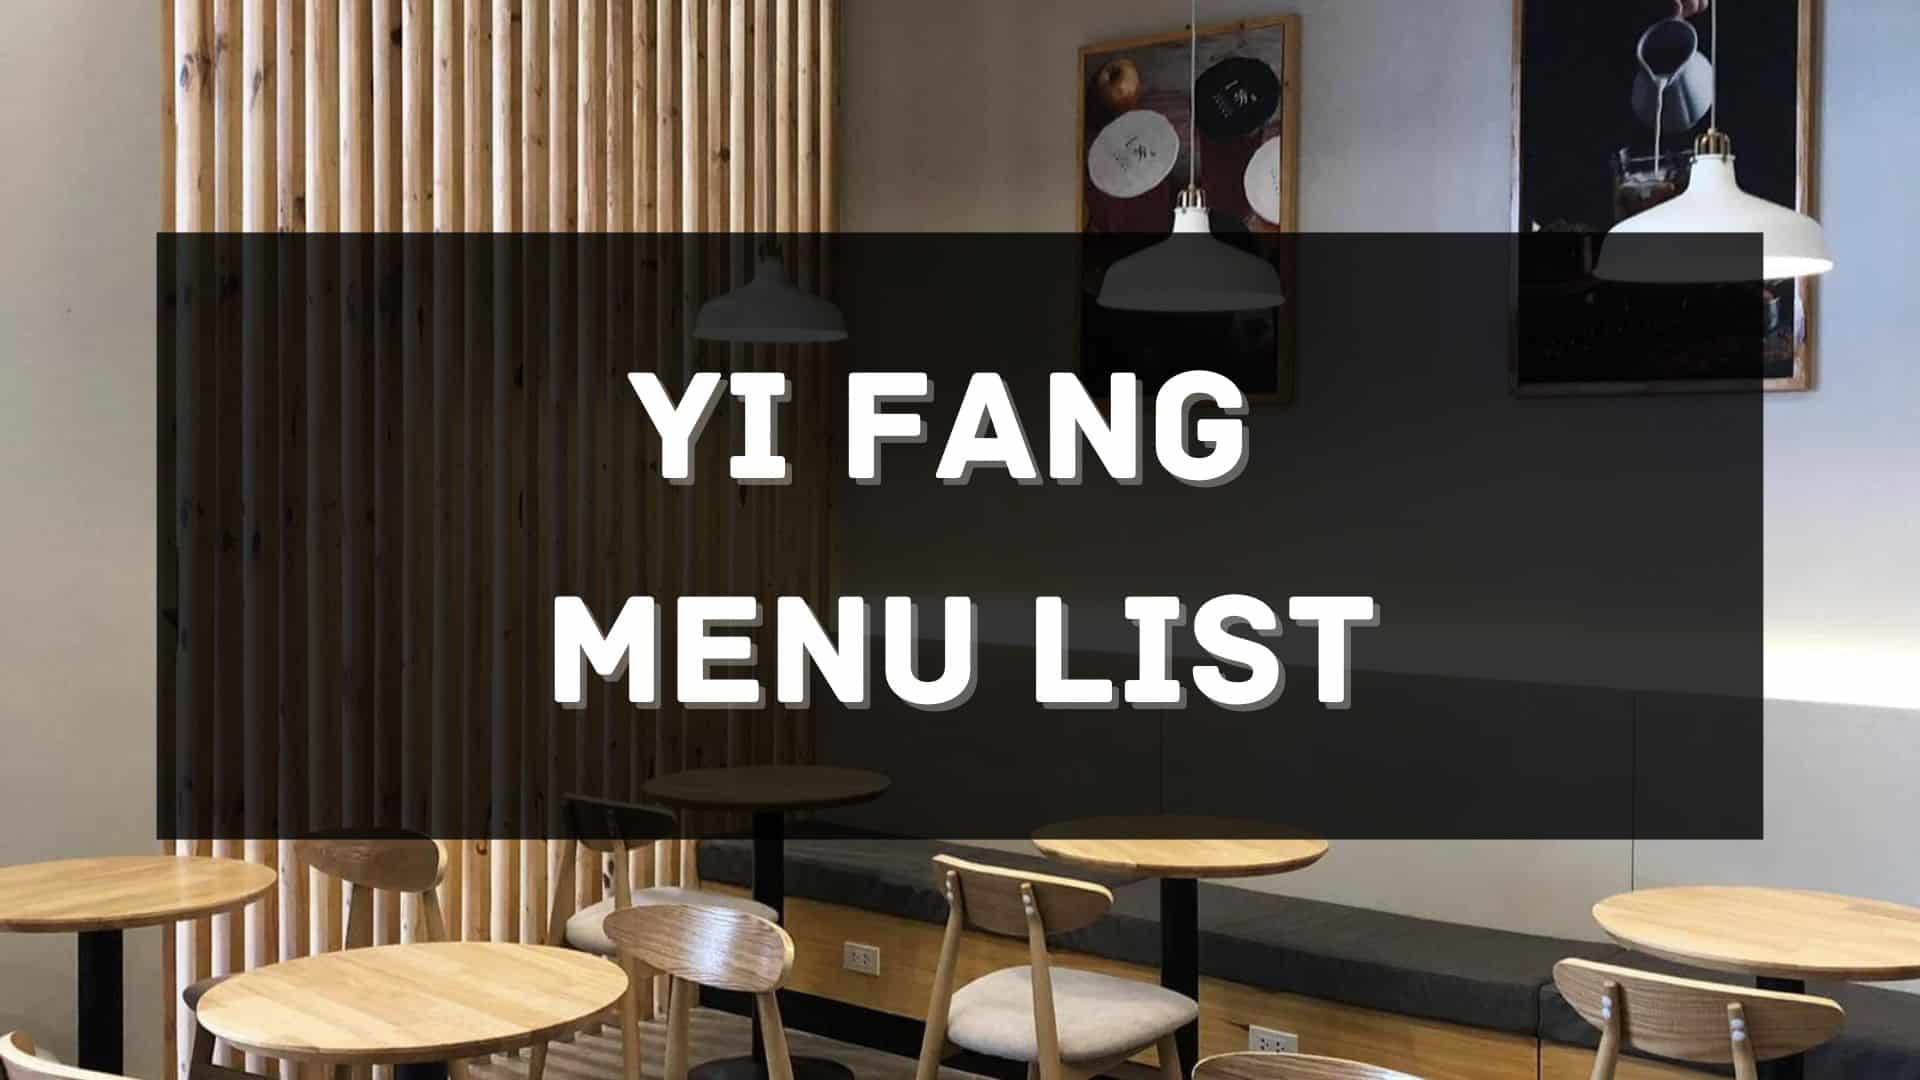 yi fang menu prices philippines